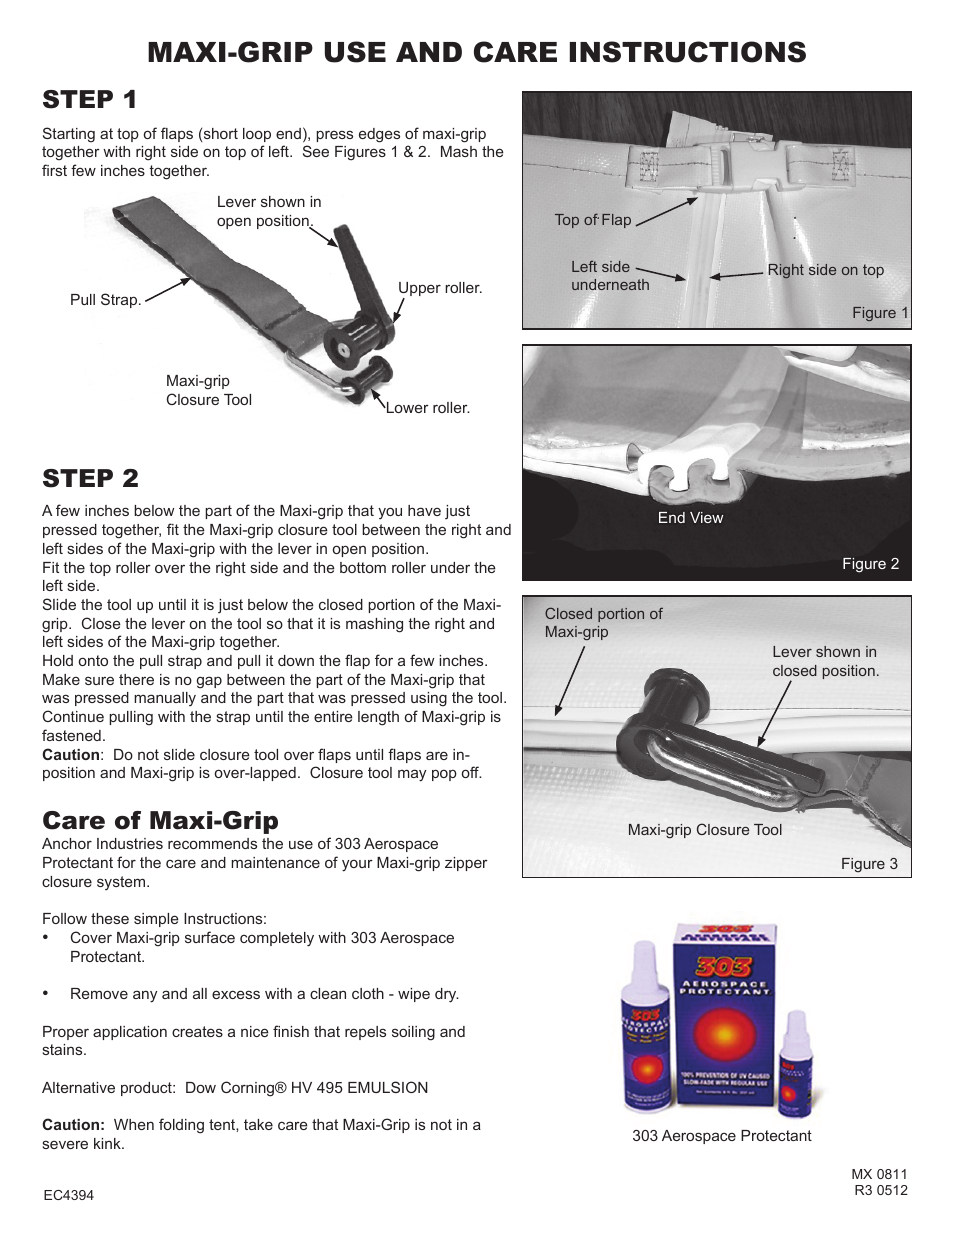 CENTURY MAXI-GRIP USE AND CARE INSTRUCTIONS